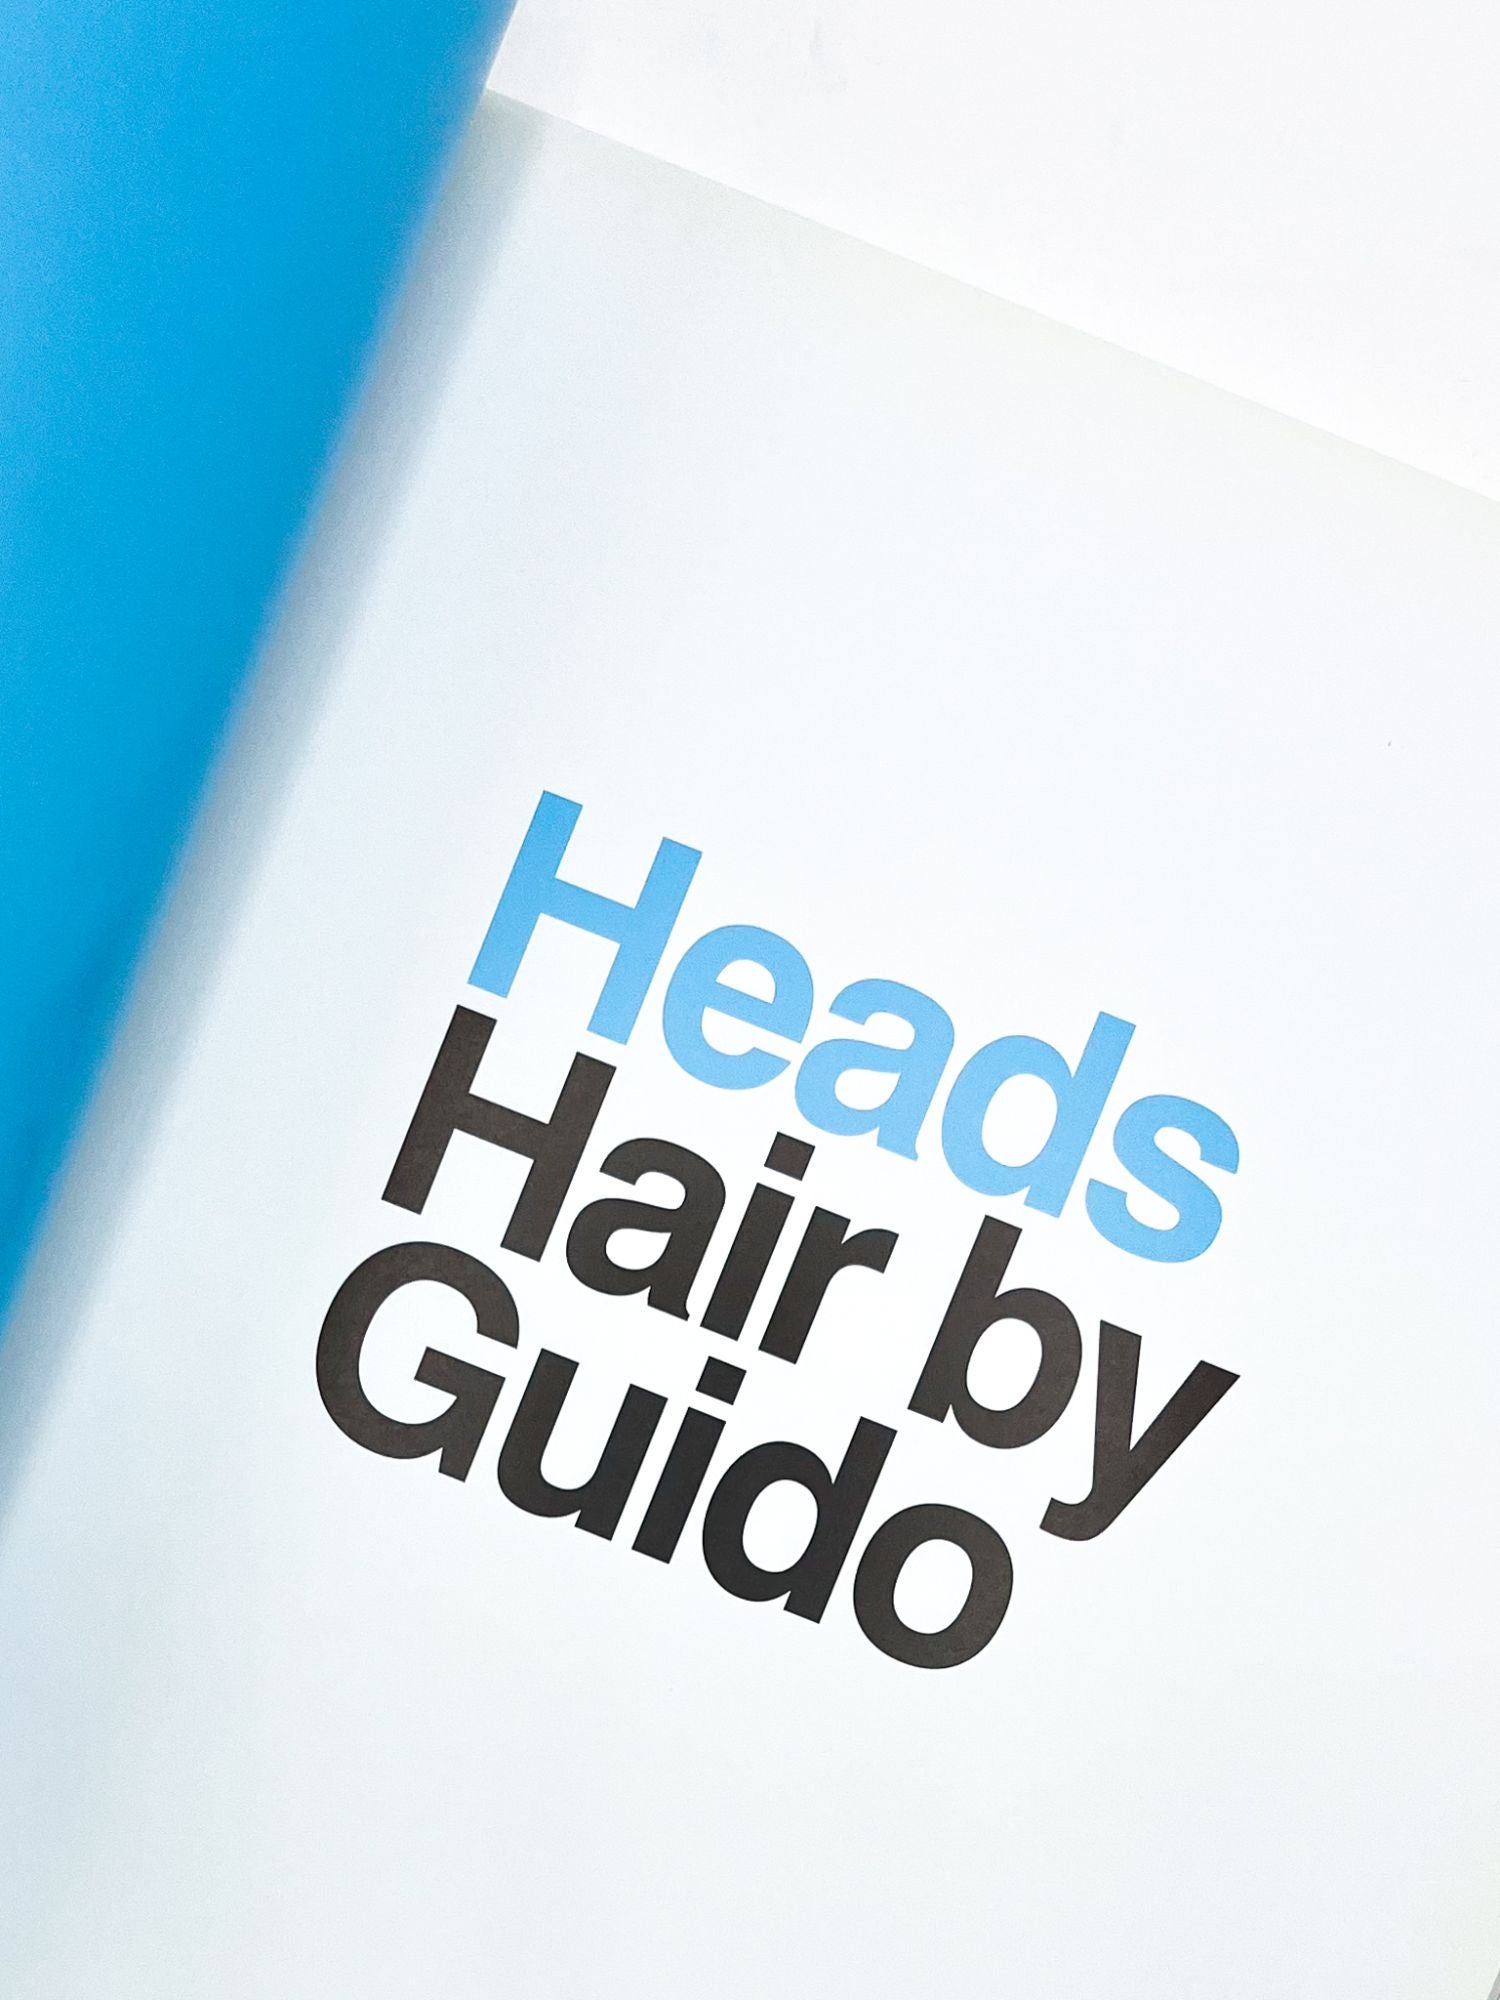 HEADS: Hair by Guido by Guido, Steven Klein, David Sims, Paul Wetherell on  Type Punch Matrix